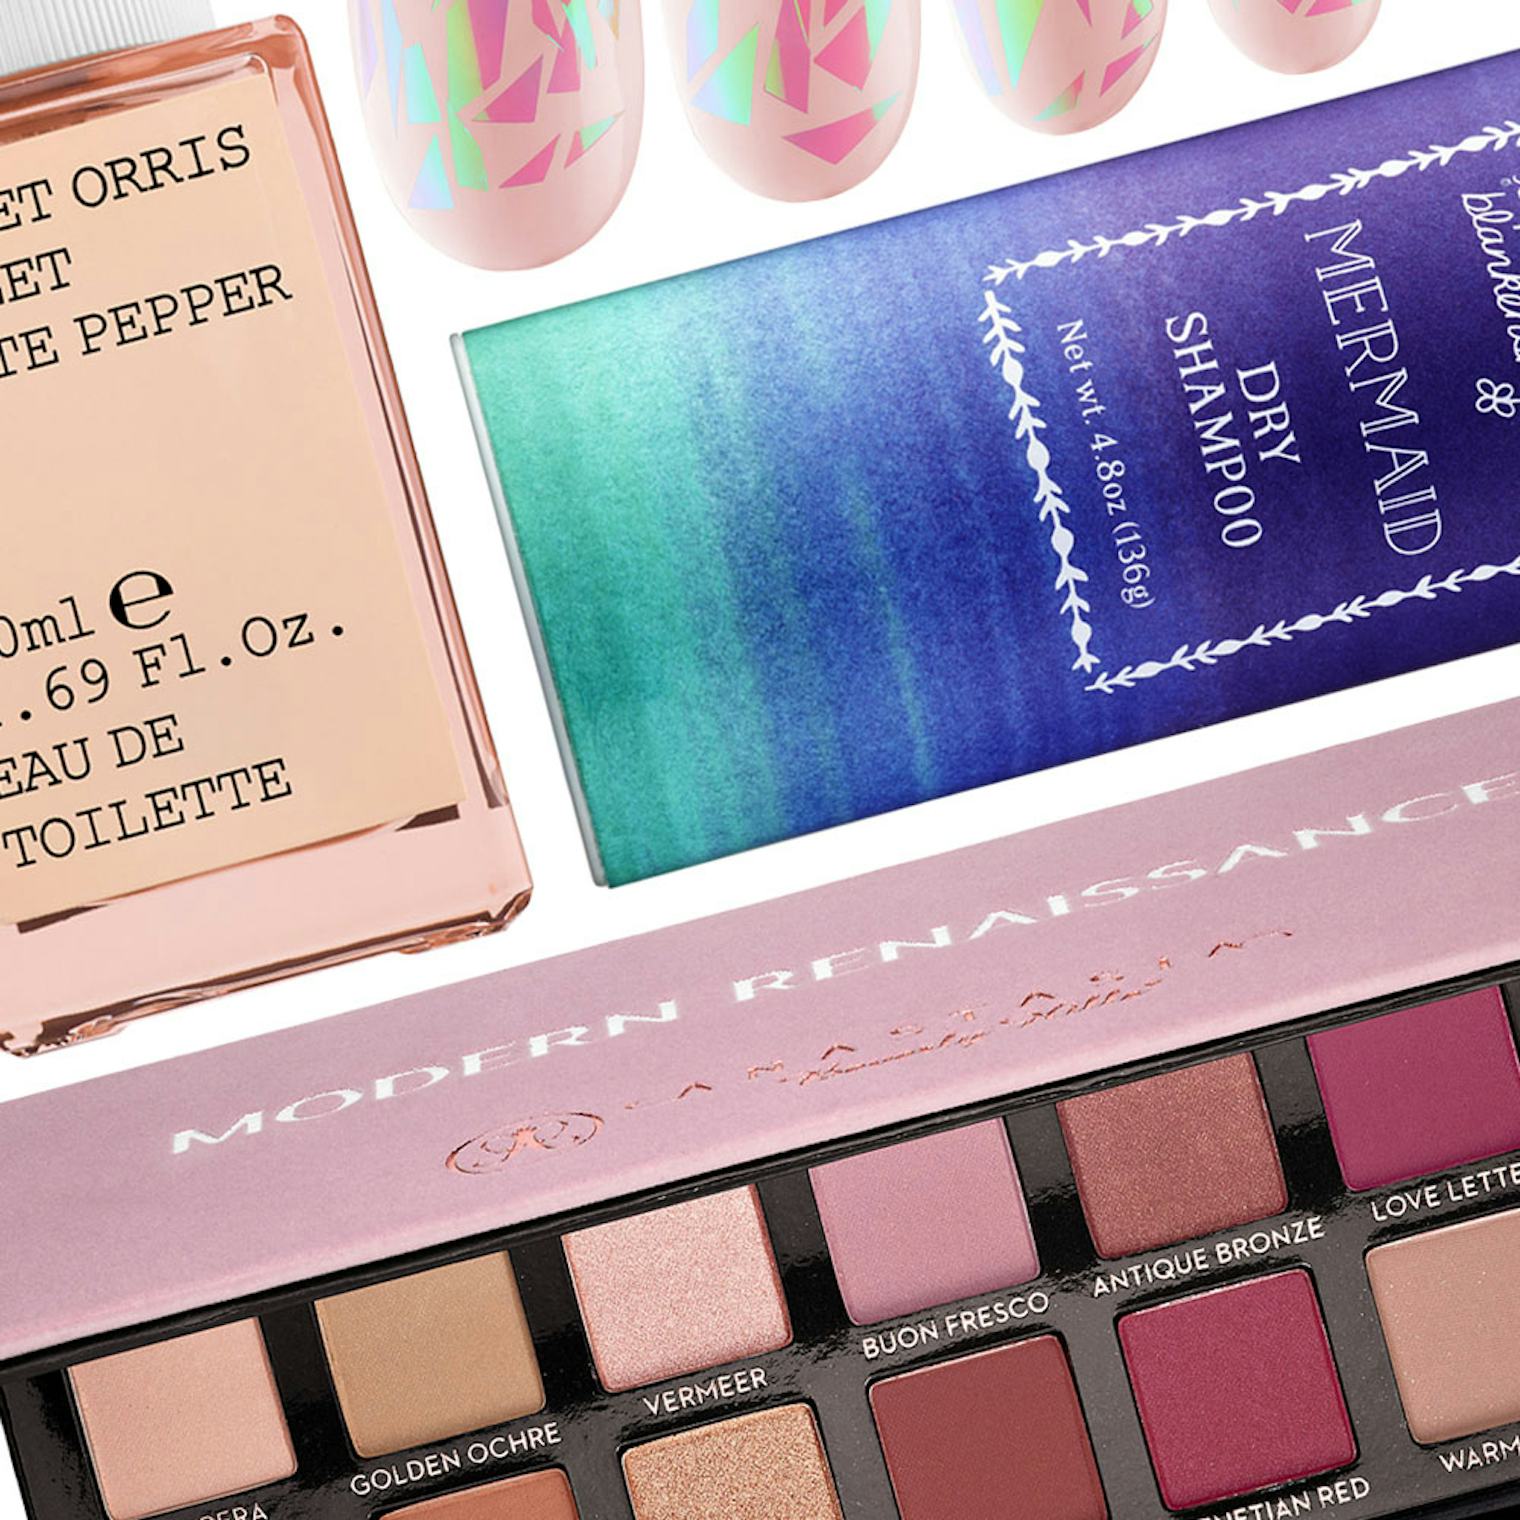 18 Things To Buy At Sephora Now